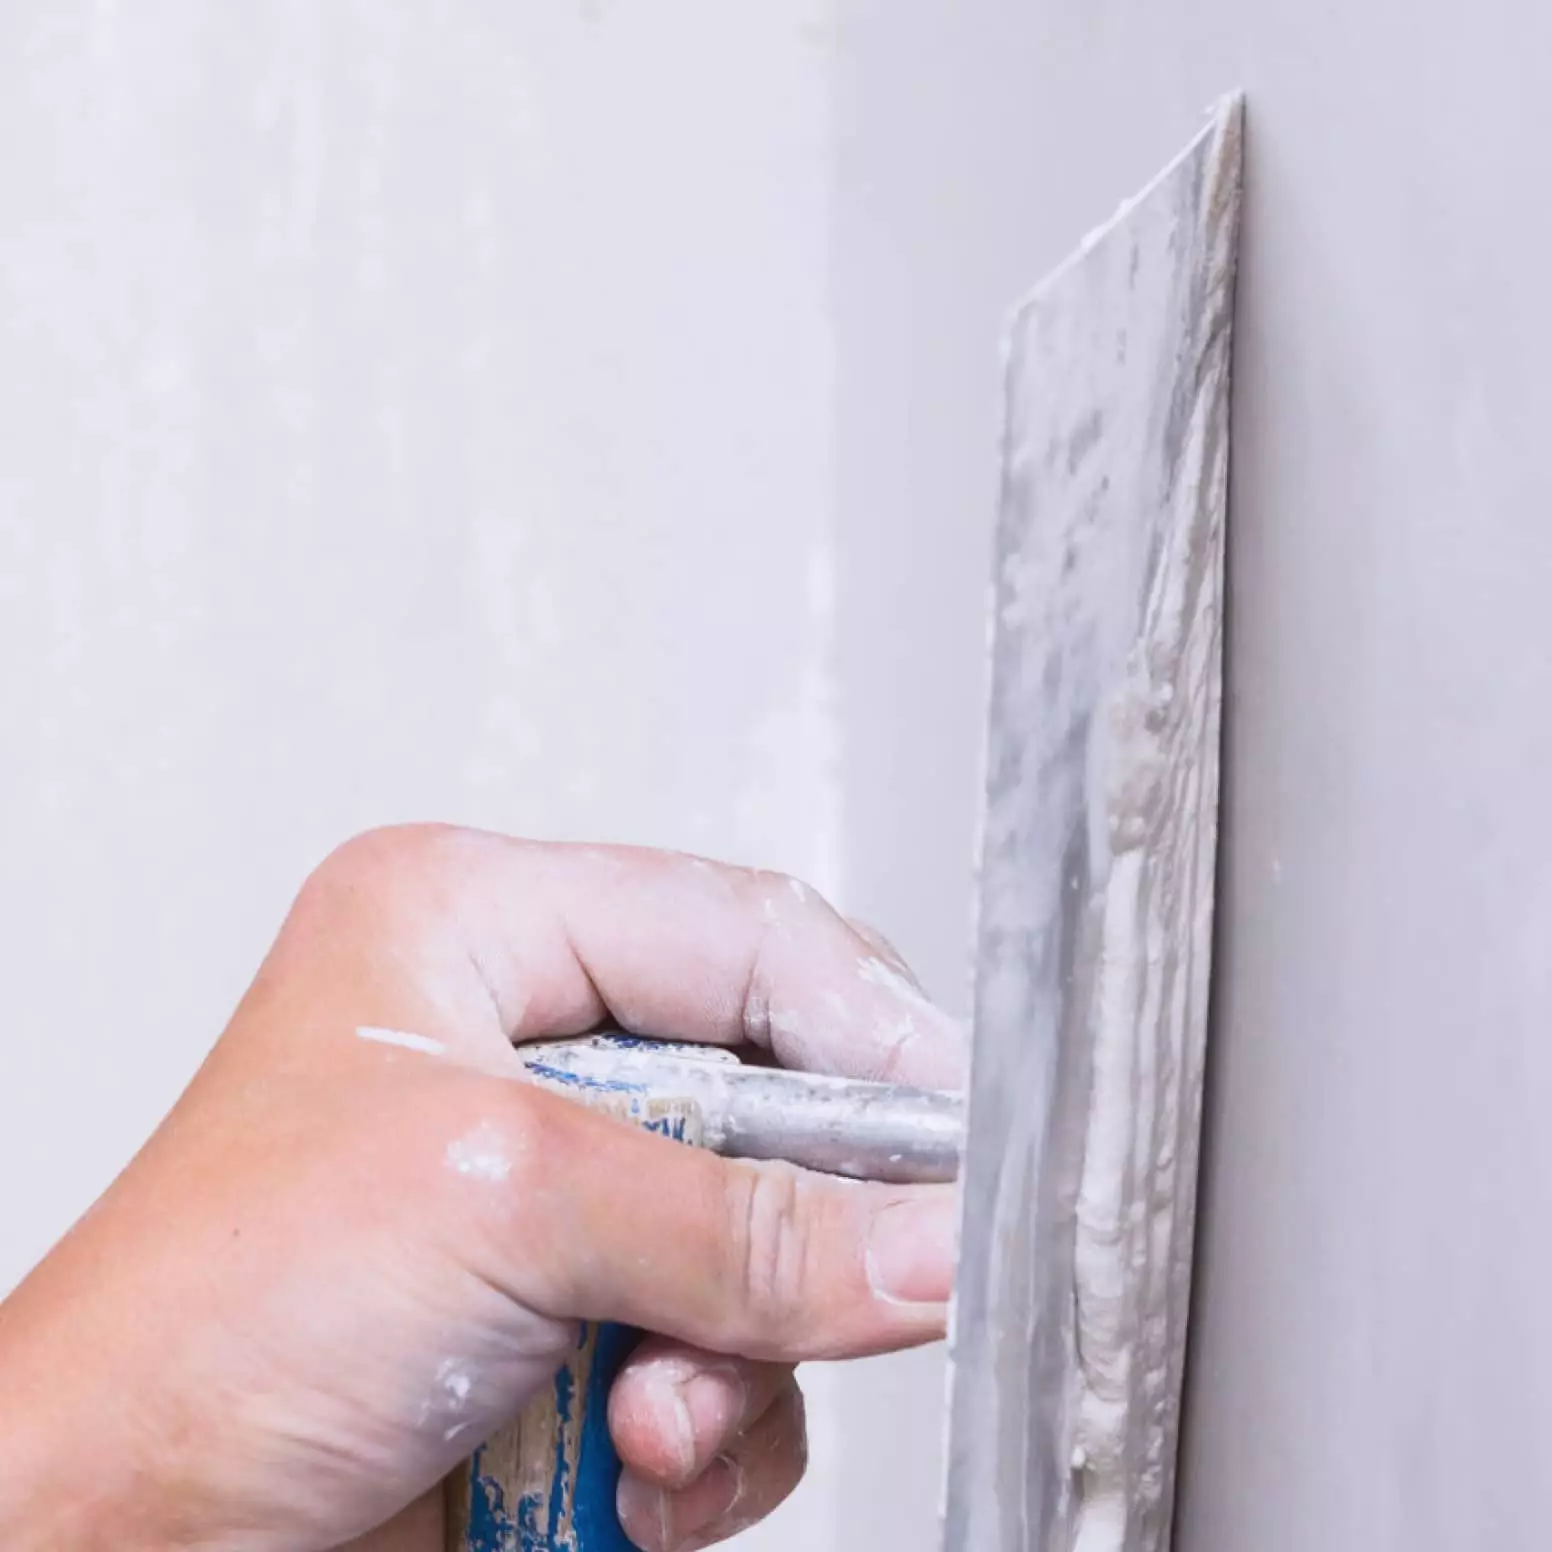 A person is using a knife to cut the wall.